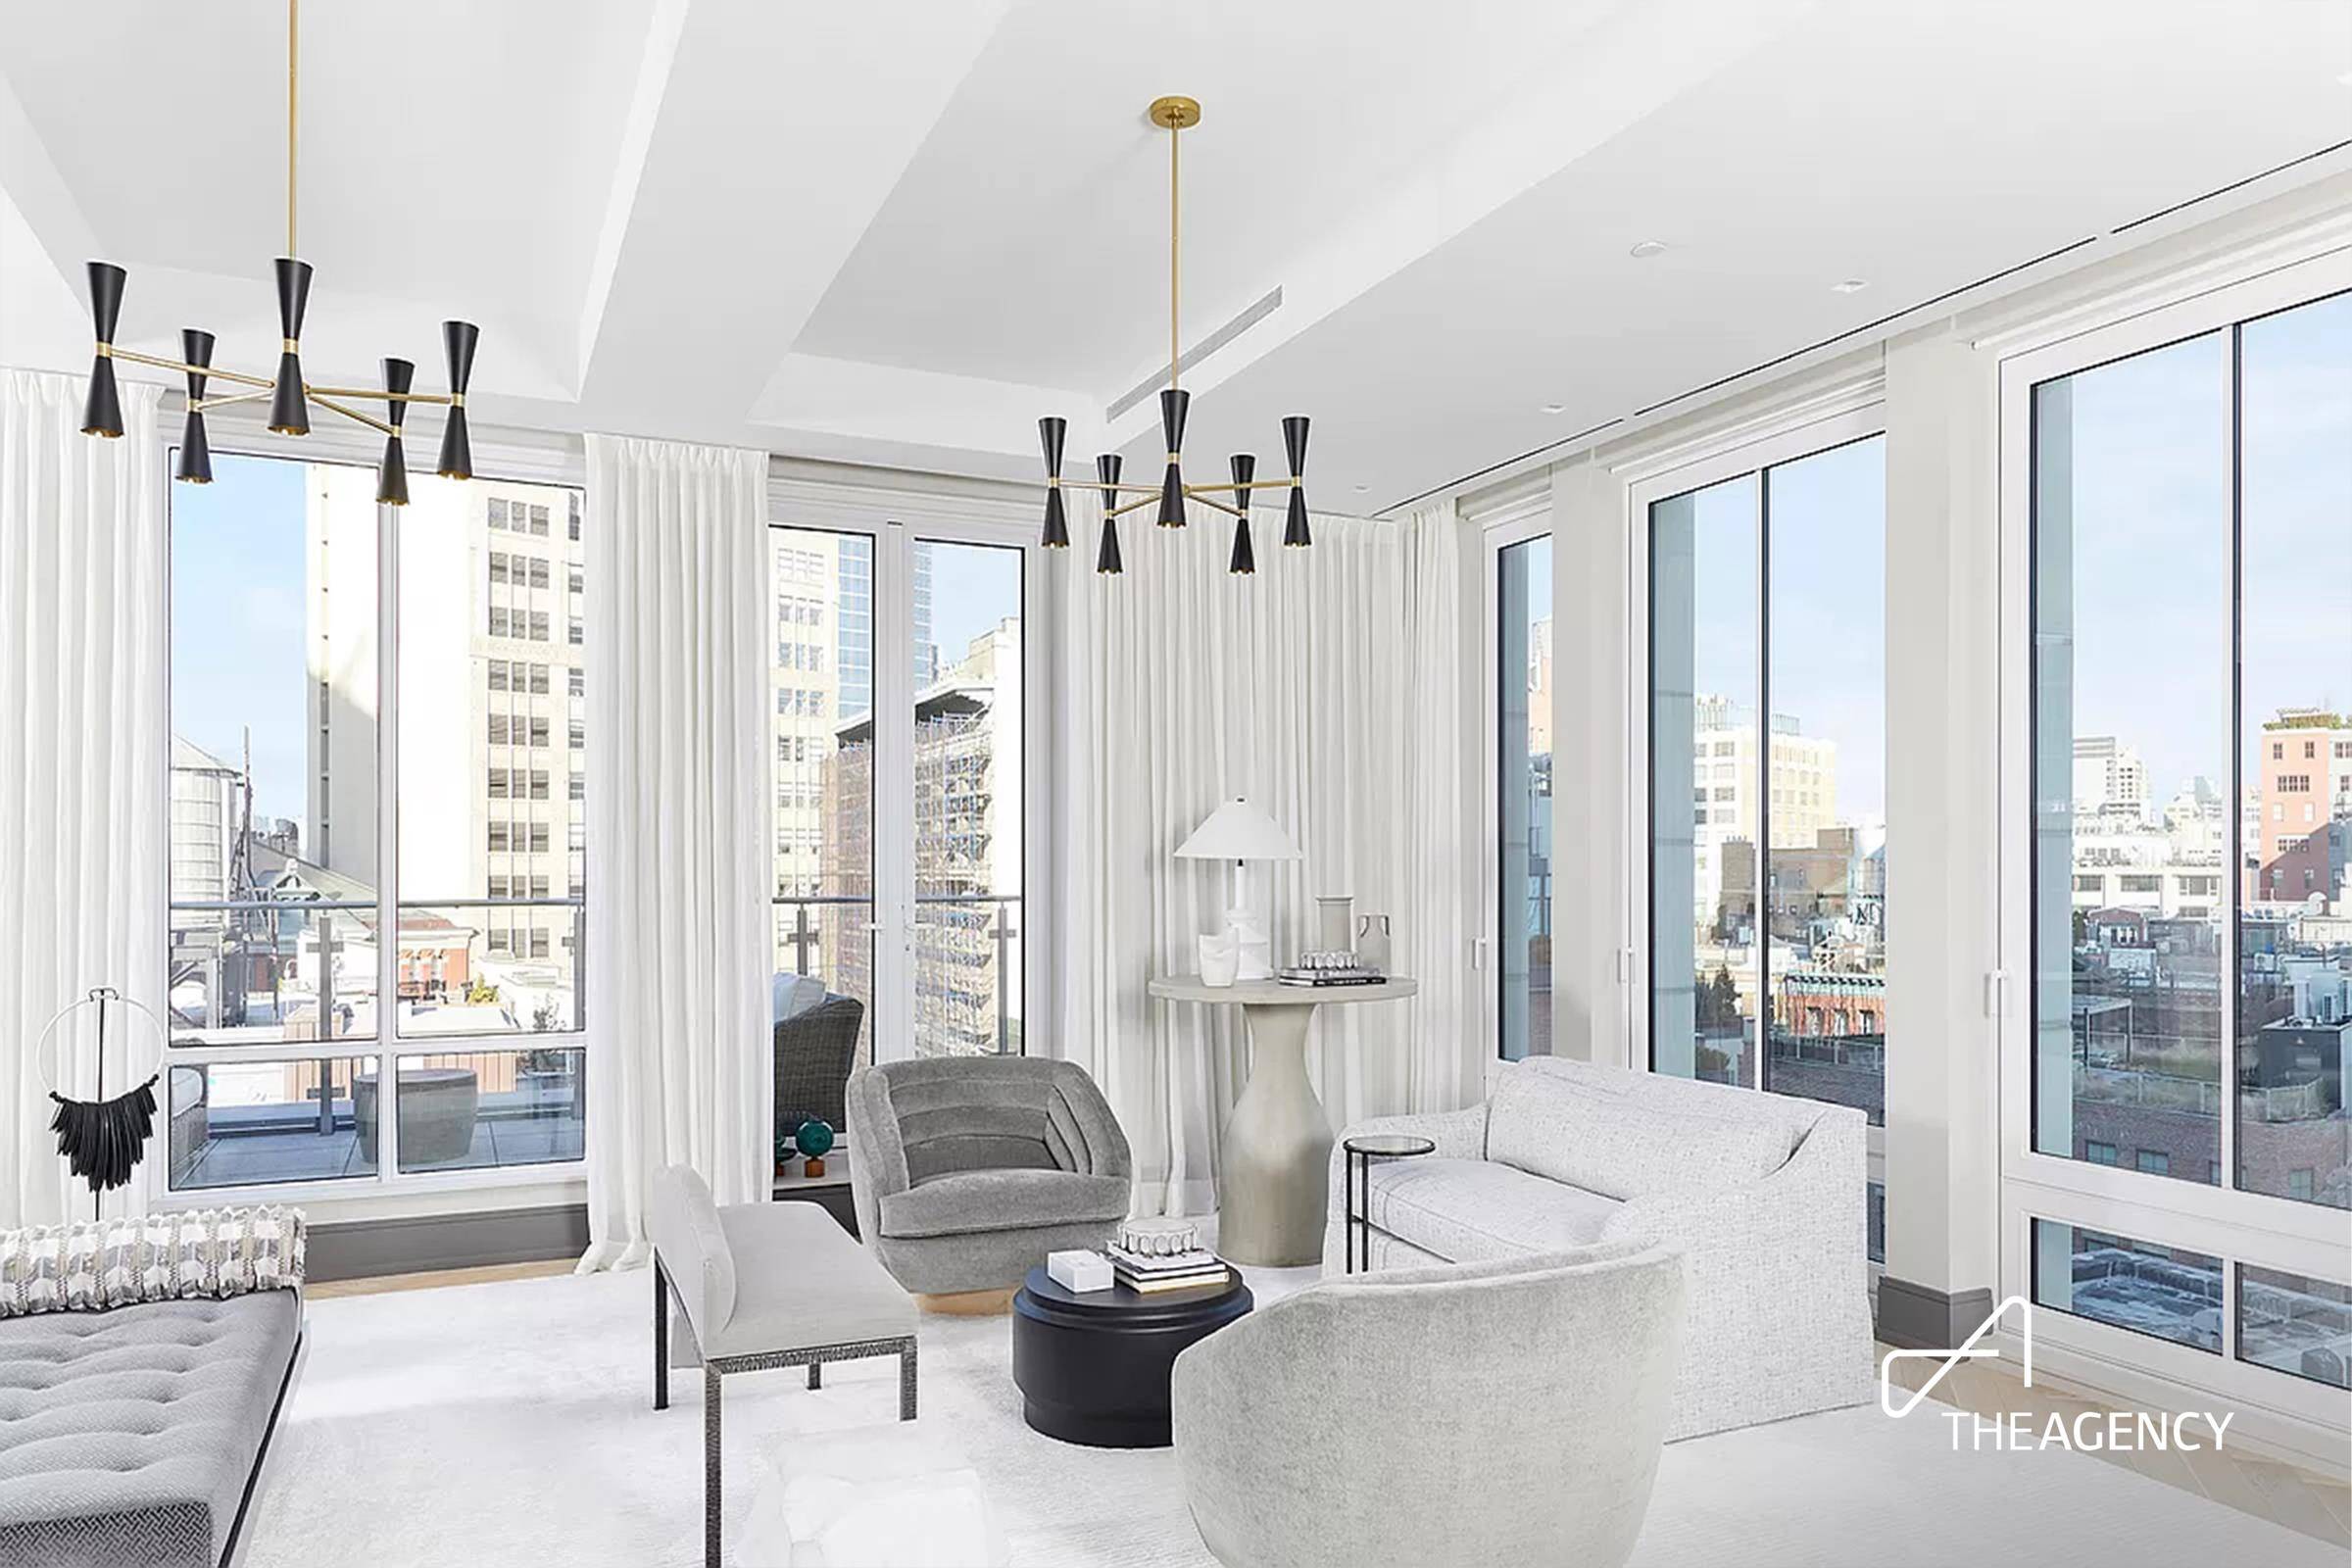 Located on a quiet stretch of road just moments from the finest restaurants, world class shopping, and high end art galleries lining Tribeca s uncrowded streets, this charismatic 7, 300 ...